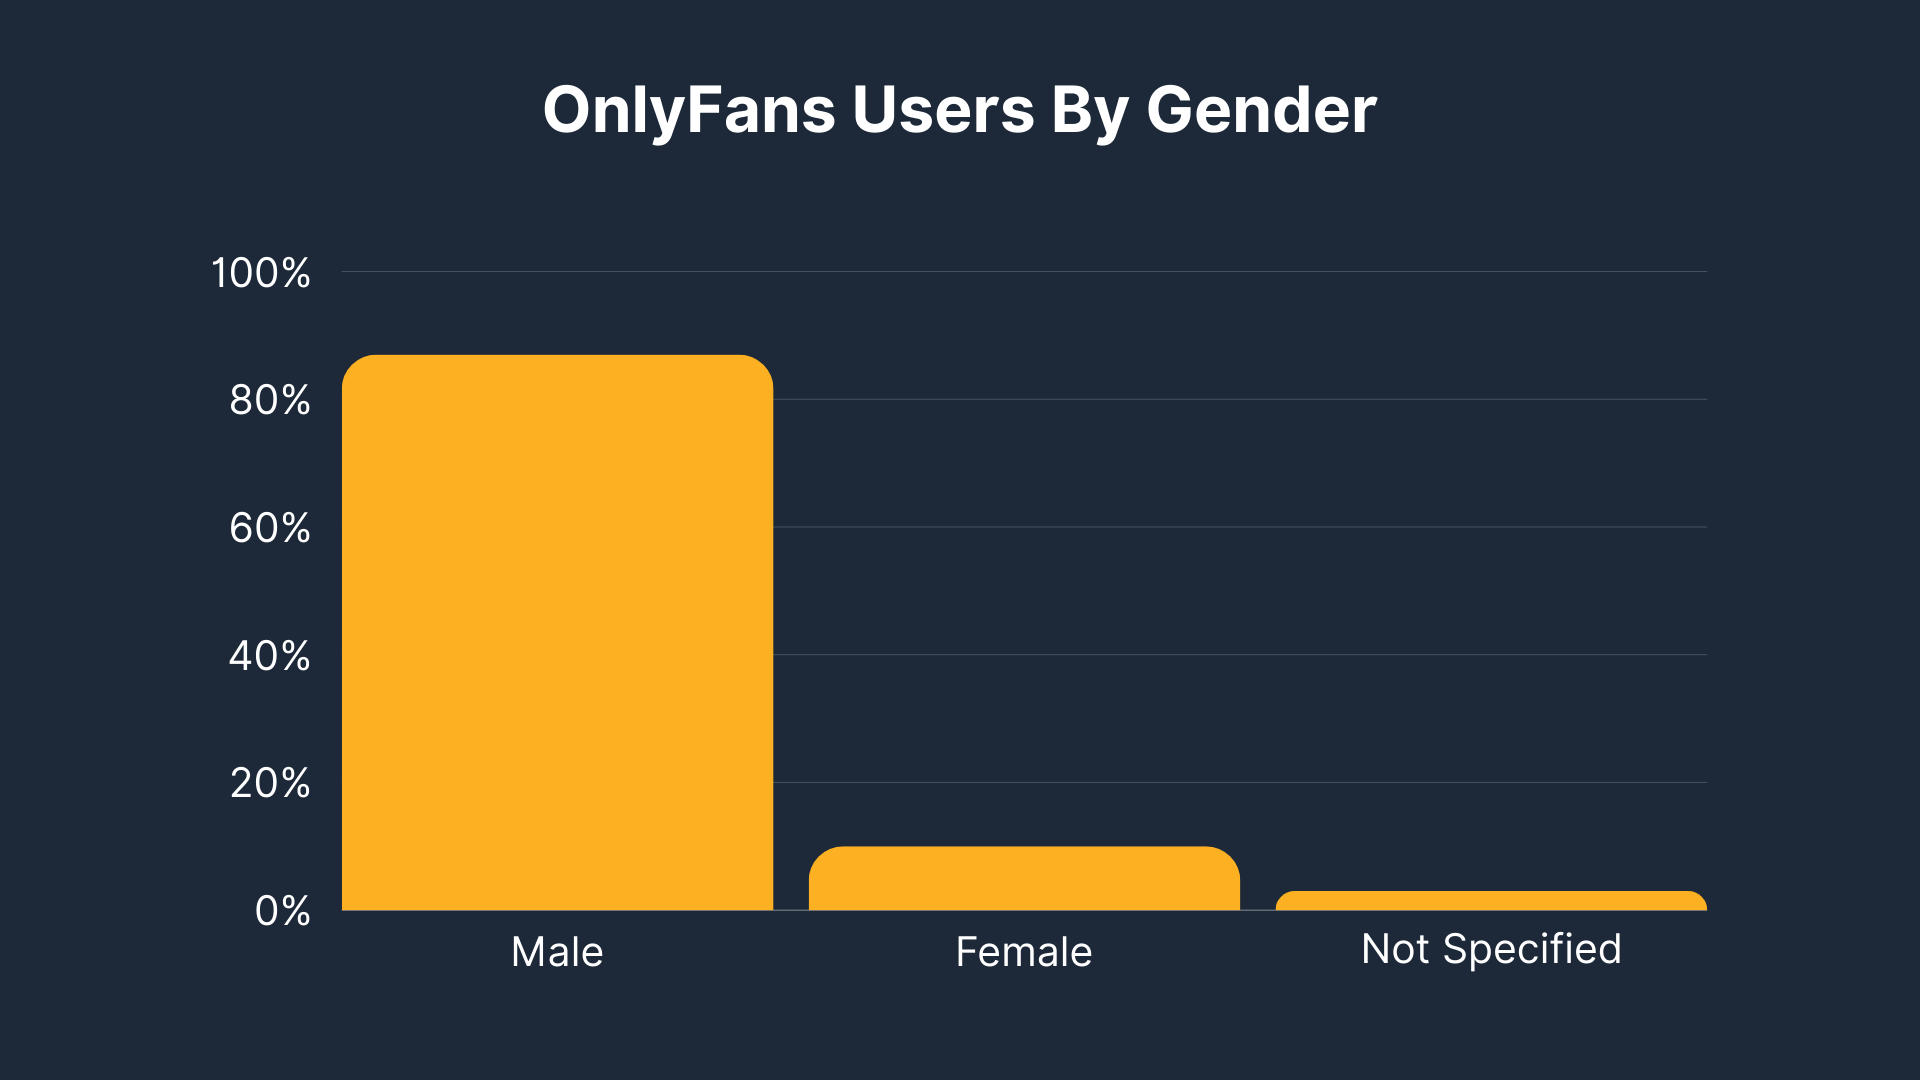 OnlyFans users by gender